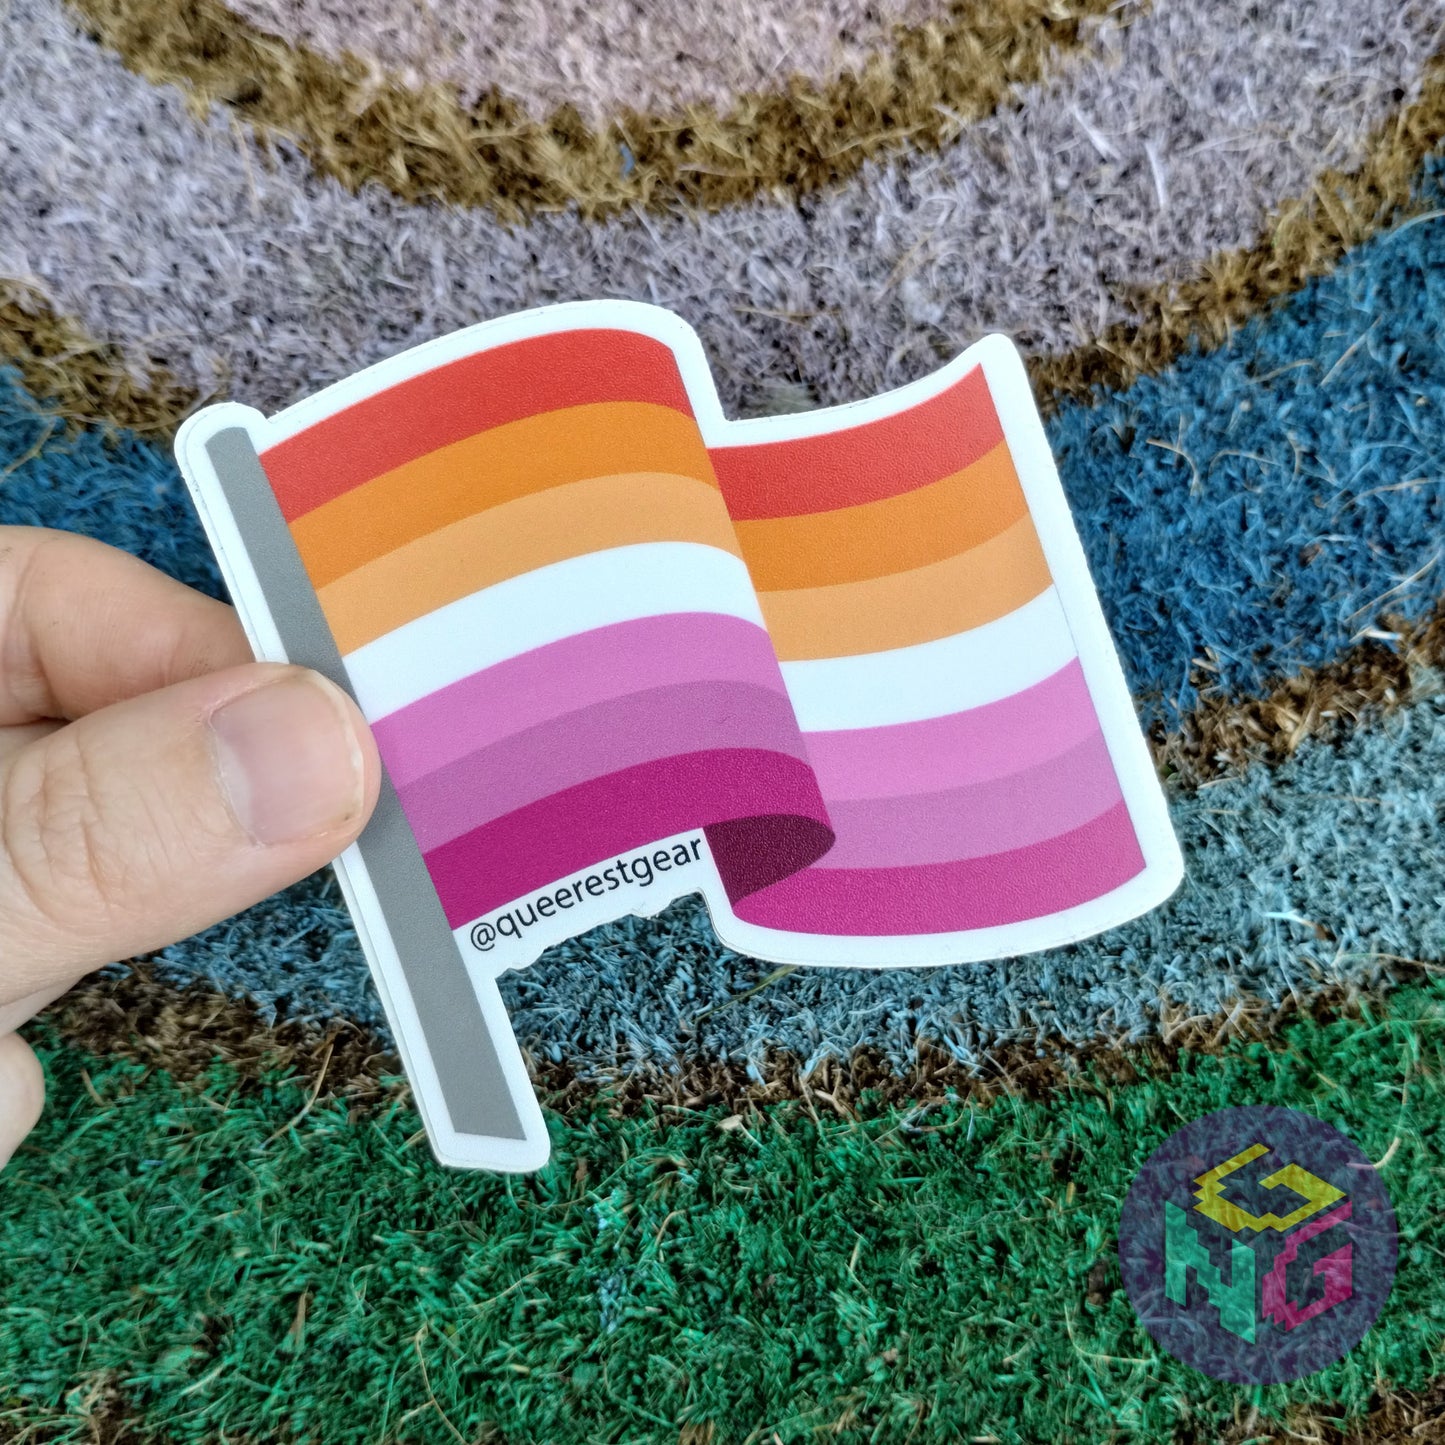 lesbian flag sticker being held in front of rainbow welcome mat